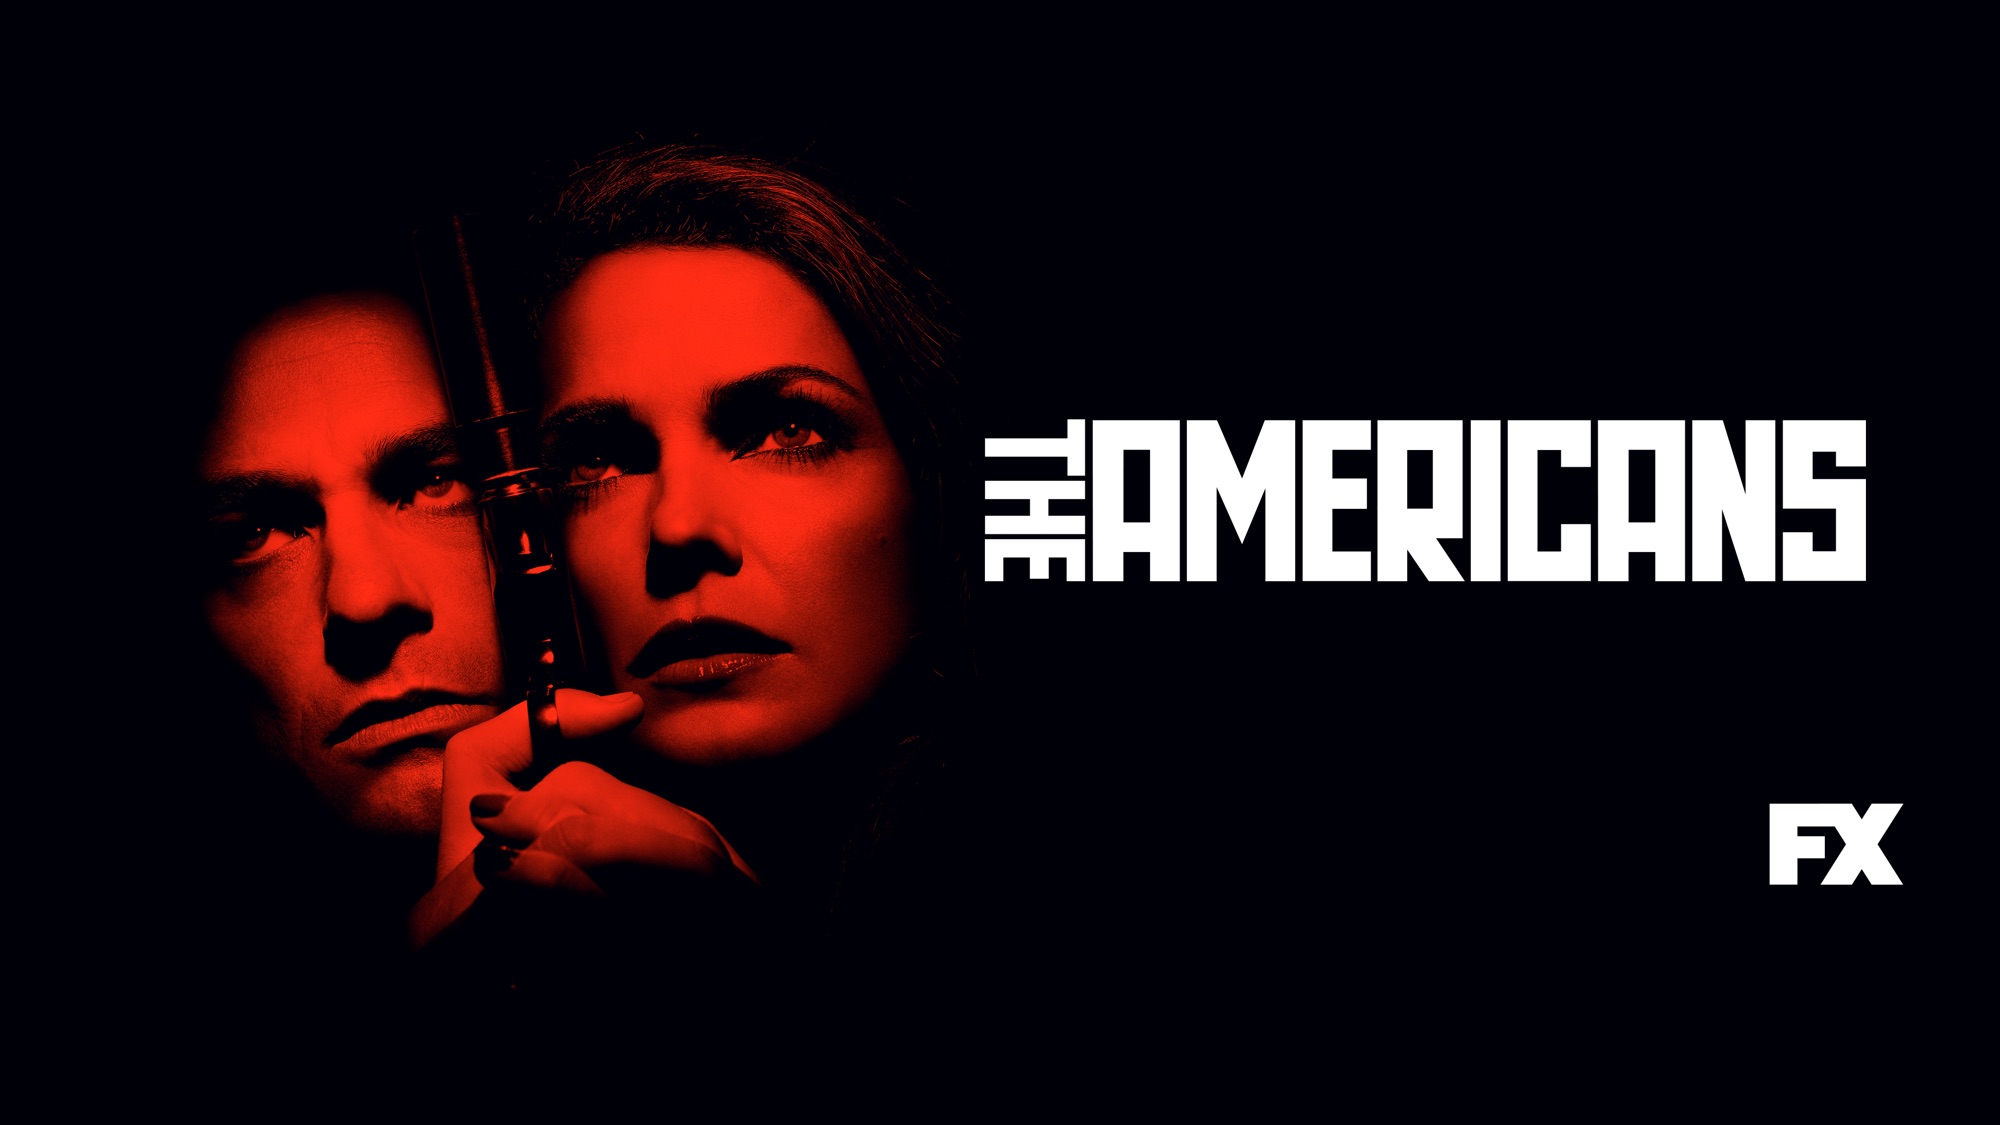 TV Show The Americans HD Wallpaper | Background Image